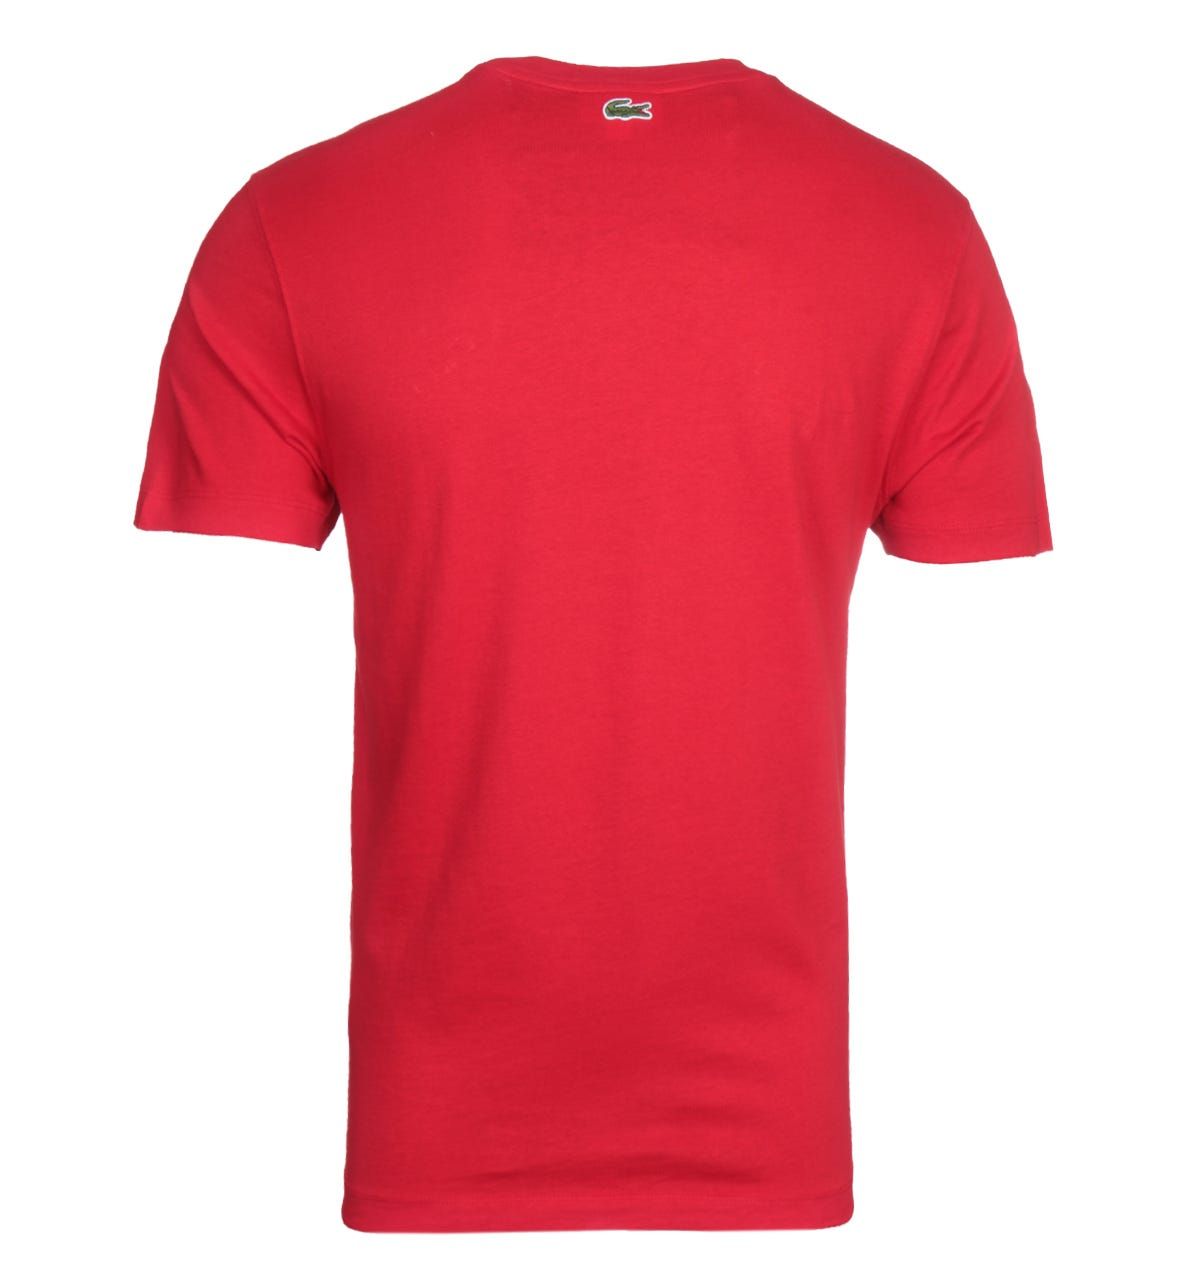 <p>Lacoste brings you an exclusive silhouette crafted from pure cotton. The Lacoste Homme Red Logo T-shirt featuring a crew neck collar and ribbed trims. The design is finished with the Lacoste logo embroidered on the chest.</p><ul><li>Cotton composition</li><li>Crew neck</li><li>Tonal stitching</li><li>Ribbed trims</li><li>Lacoste logo embroidered on chest</li></ul><p>Style & Fit:</p><ul><li>Regular fit</li><li>Fits true to size</li></ul><p>Fabric Composition & Care:</p><ul><li>100% Cotton</li><li>Machine washable</li></ul>